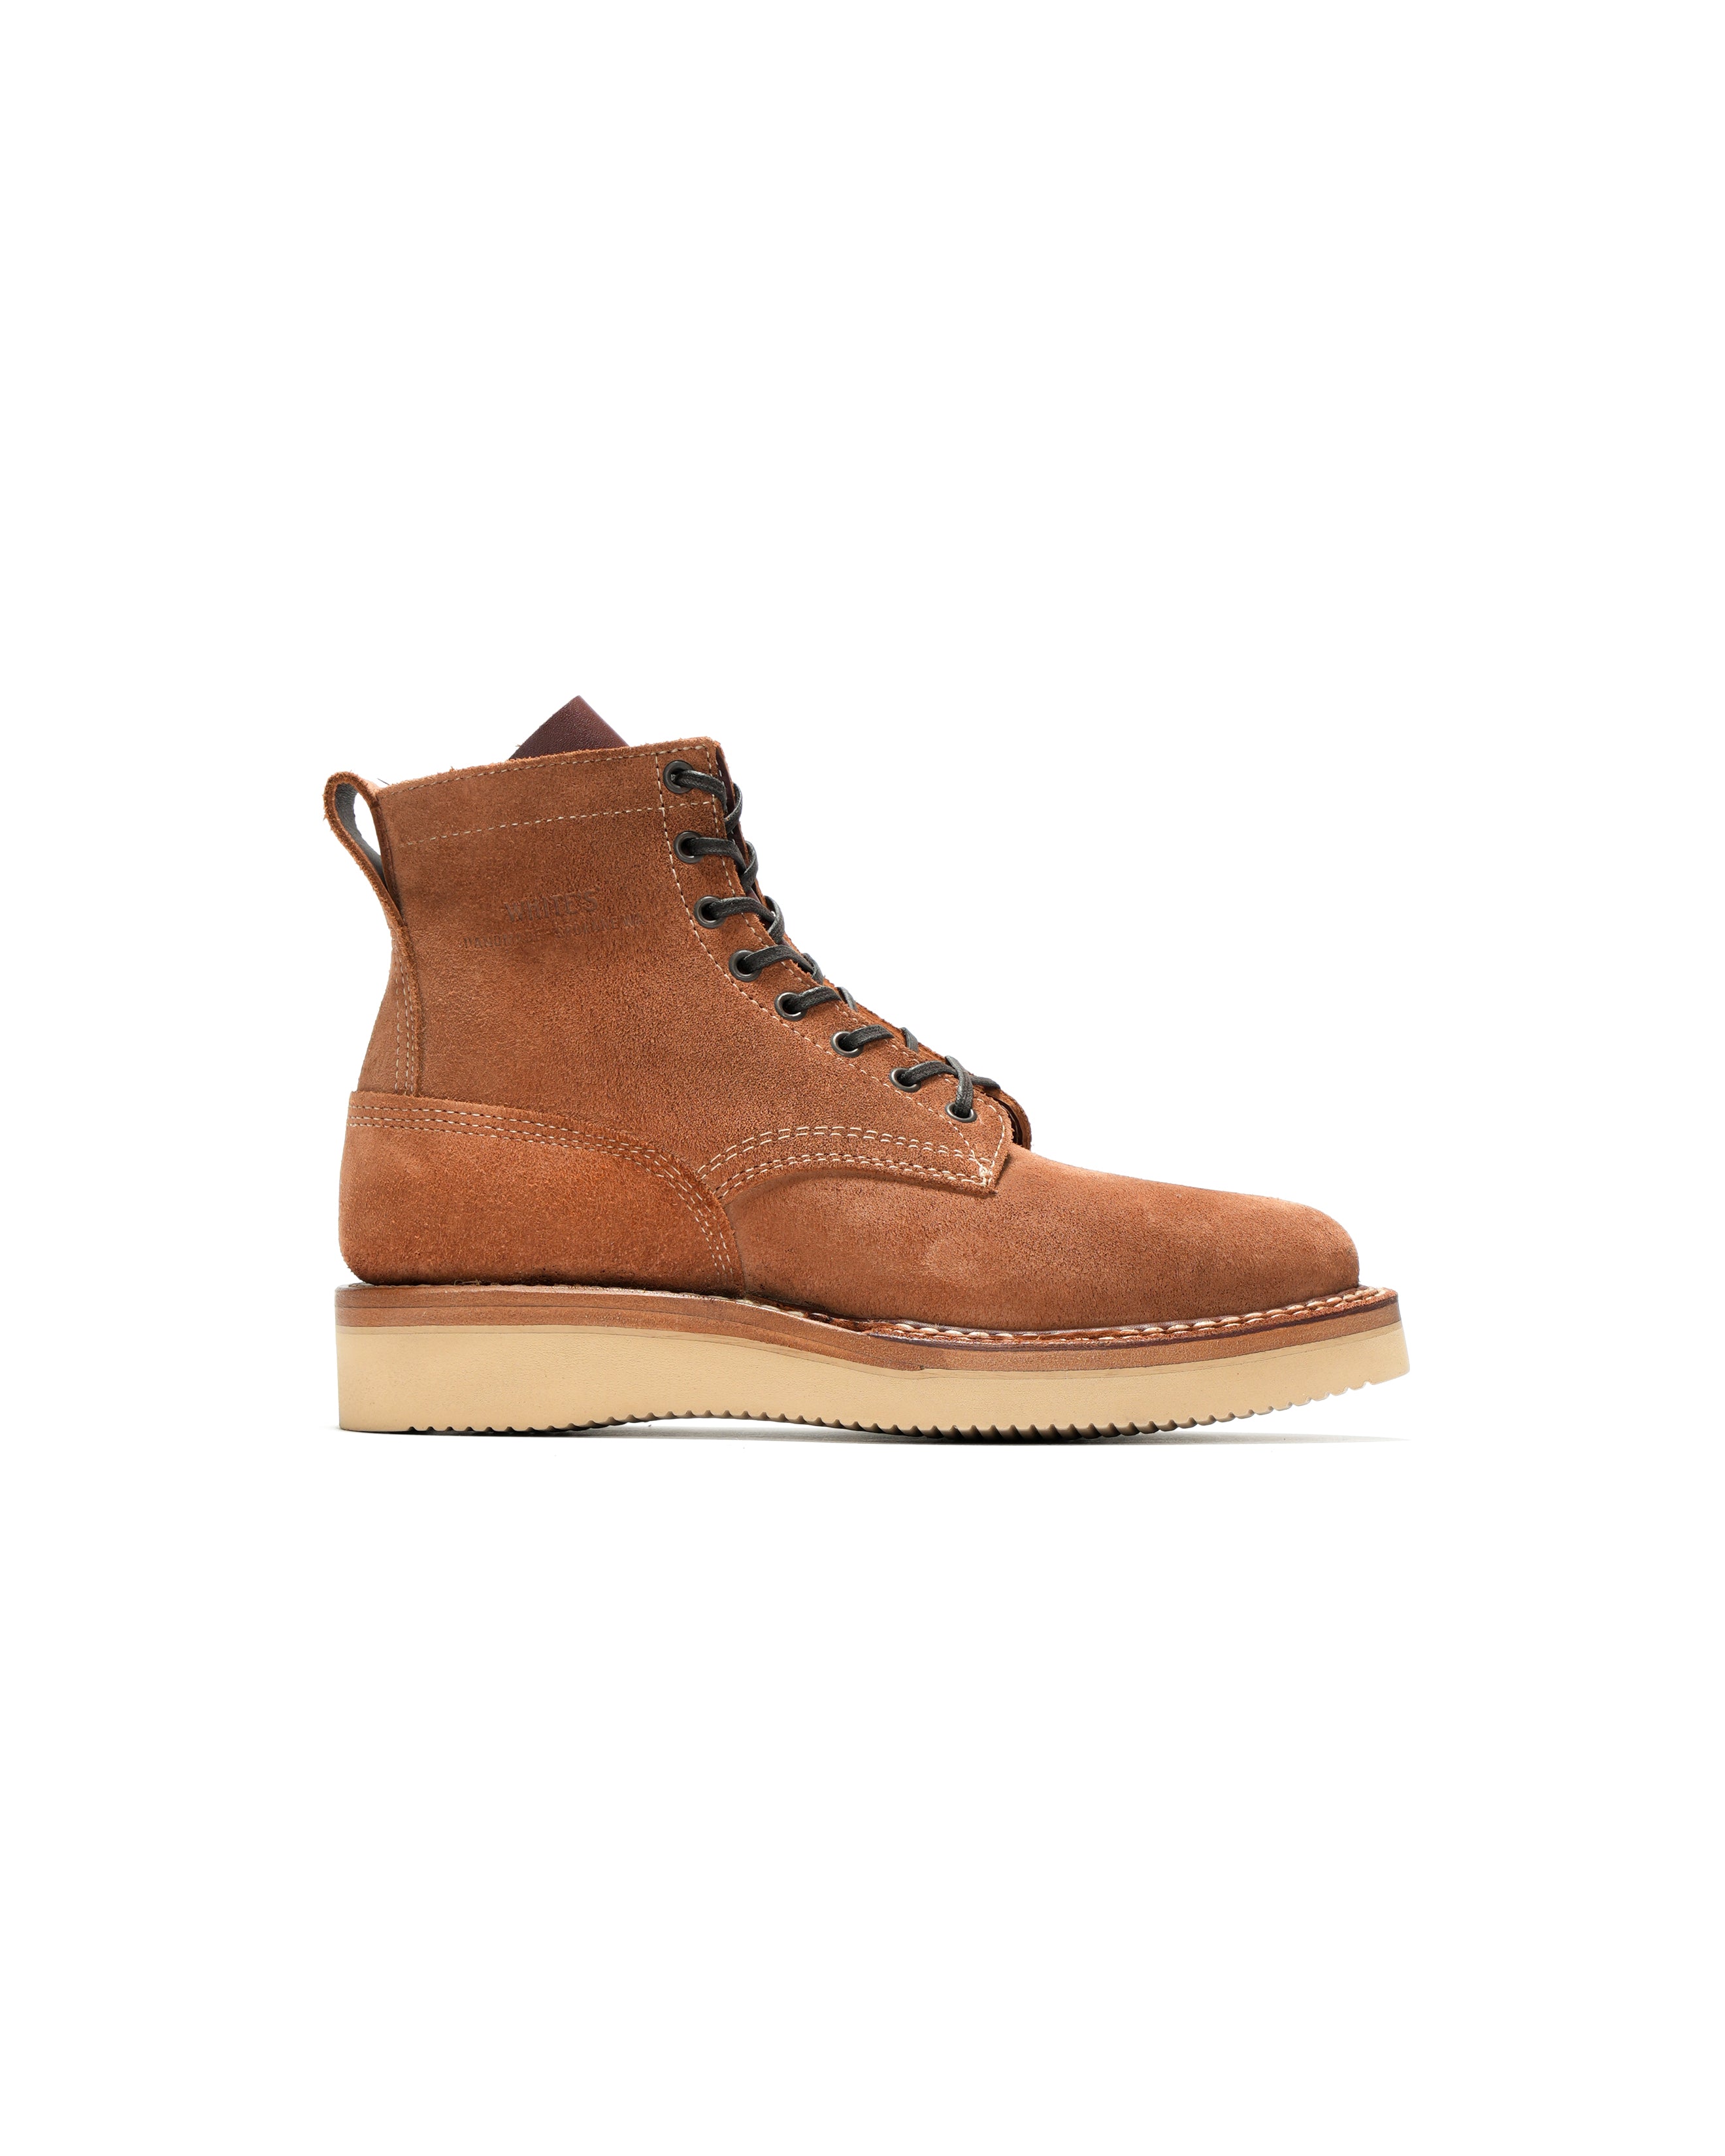 Rambler - Red Dog - Rough Out Vibram sole